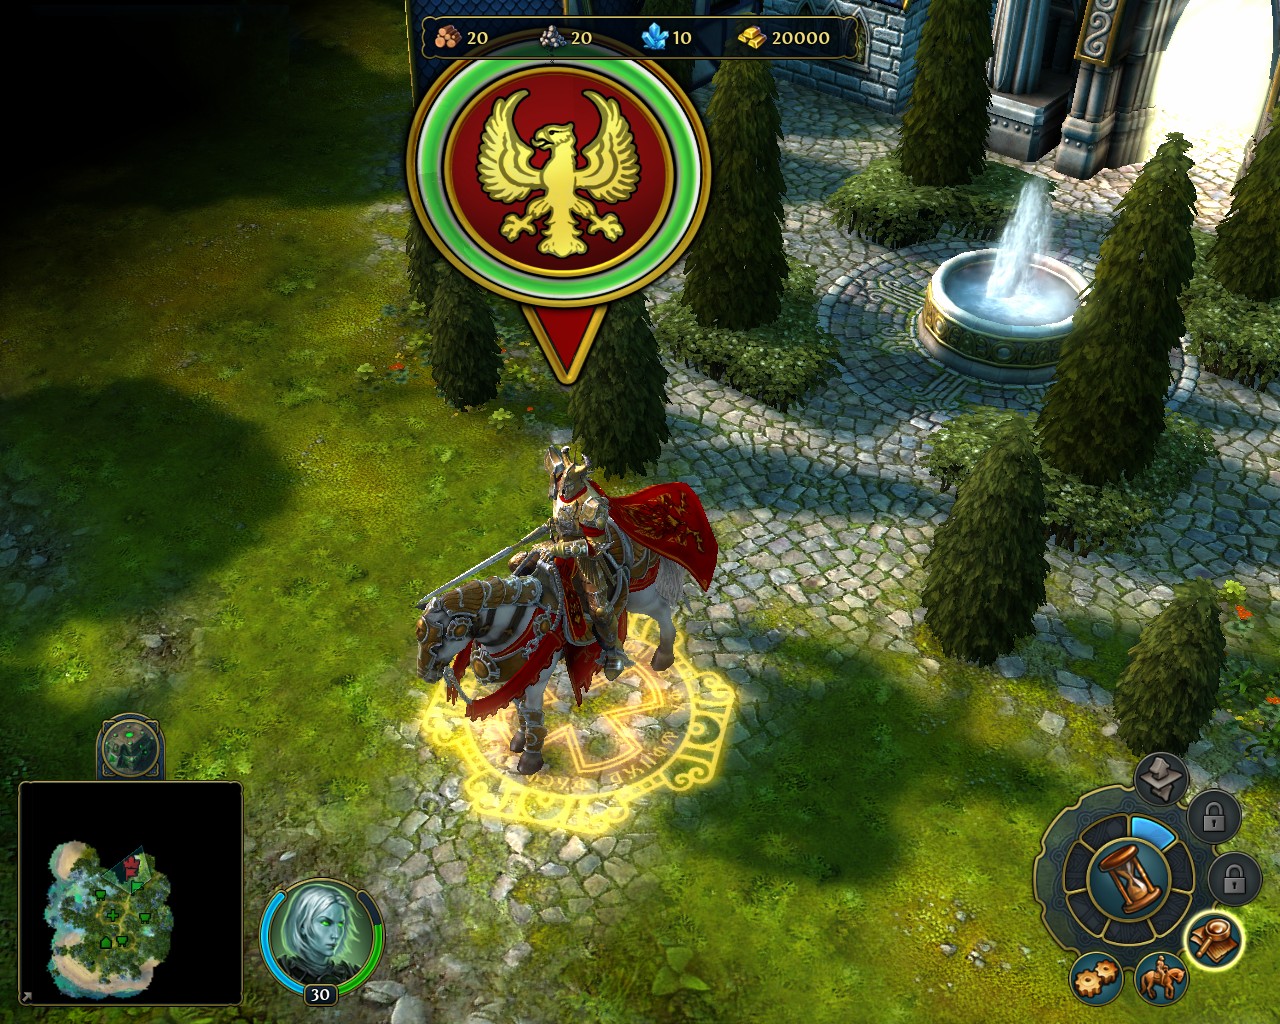 ħ֮Ӣ޵6(Heroes of Might and Magic VI) v1.0.31758޸